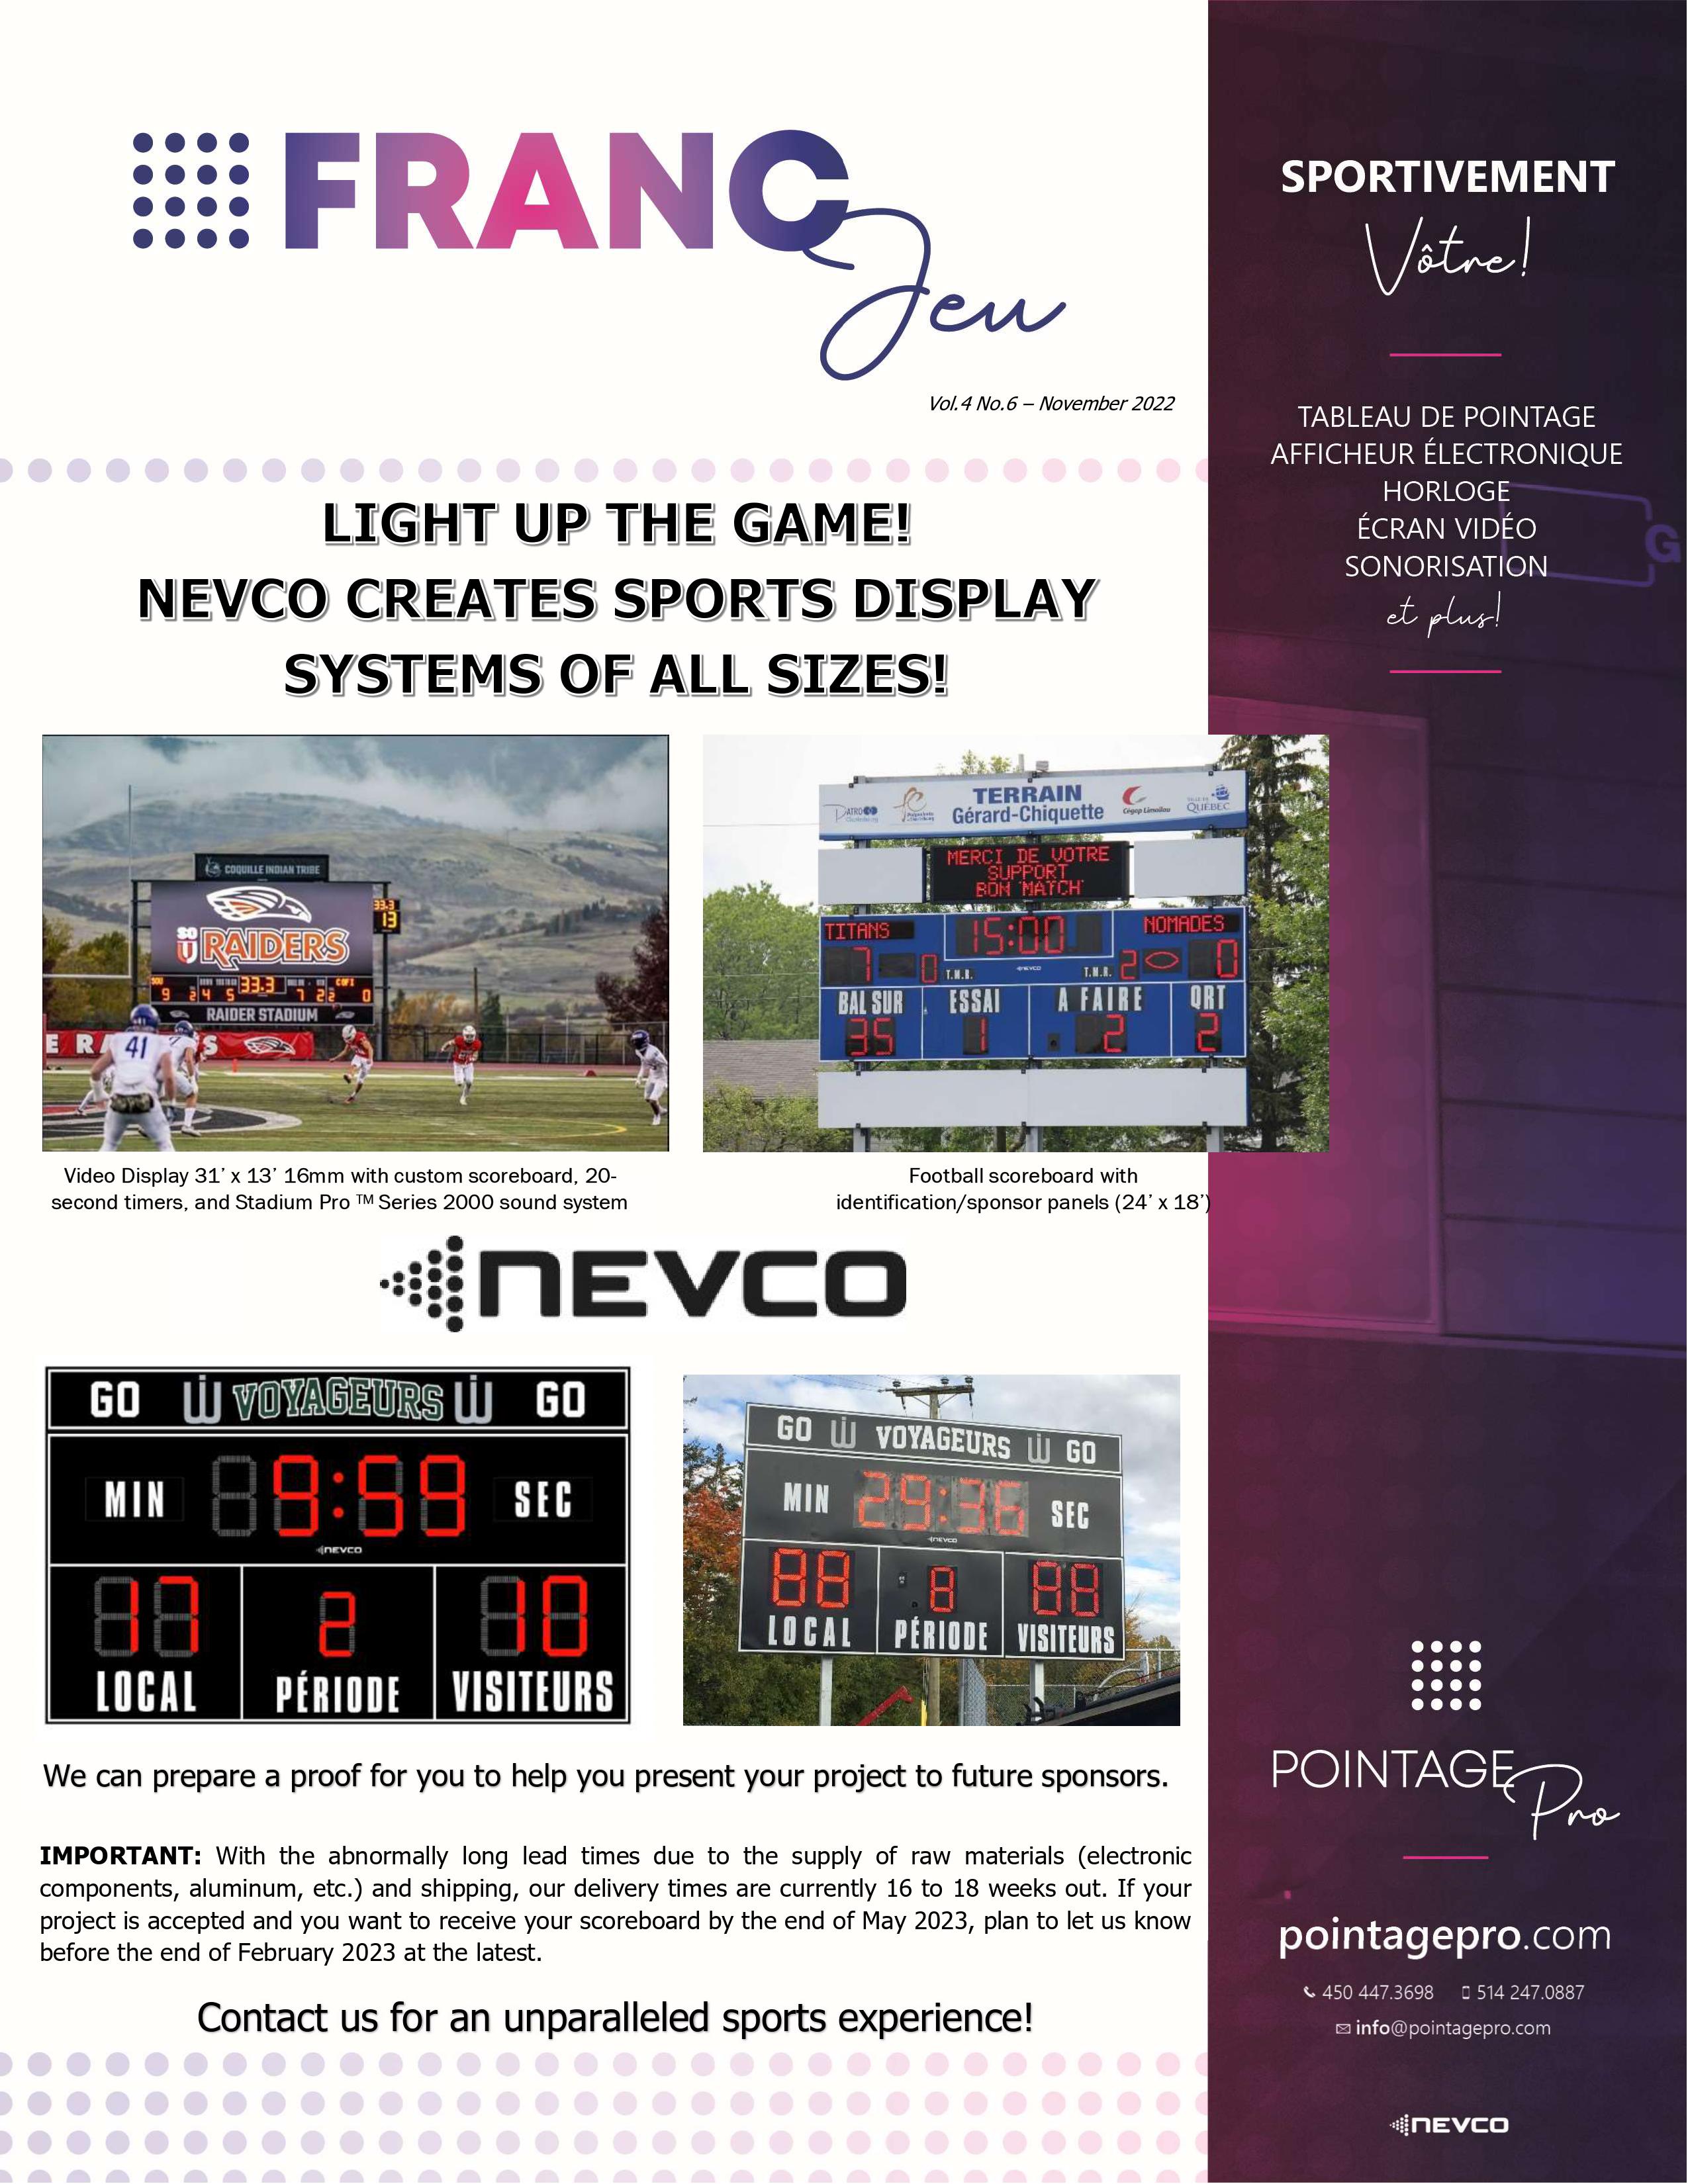 Light up your game of football with a Nevco sports display